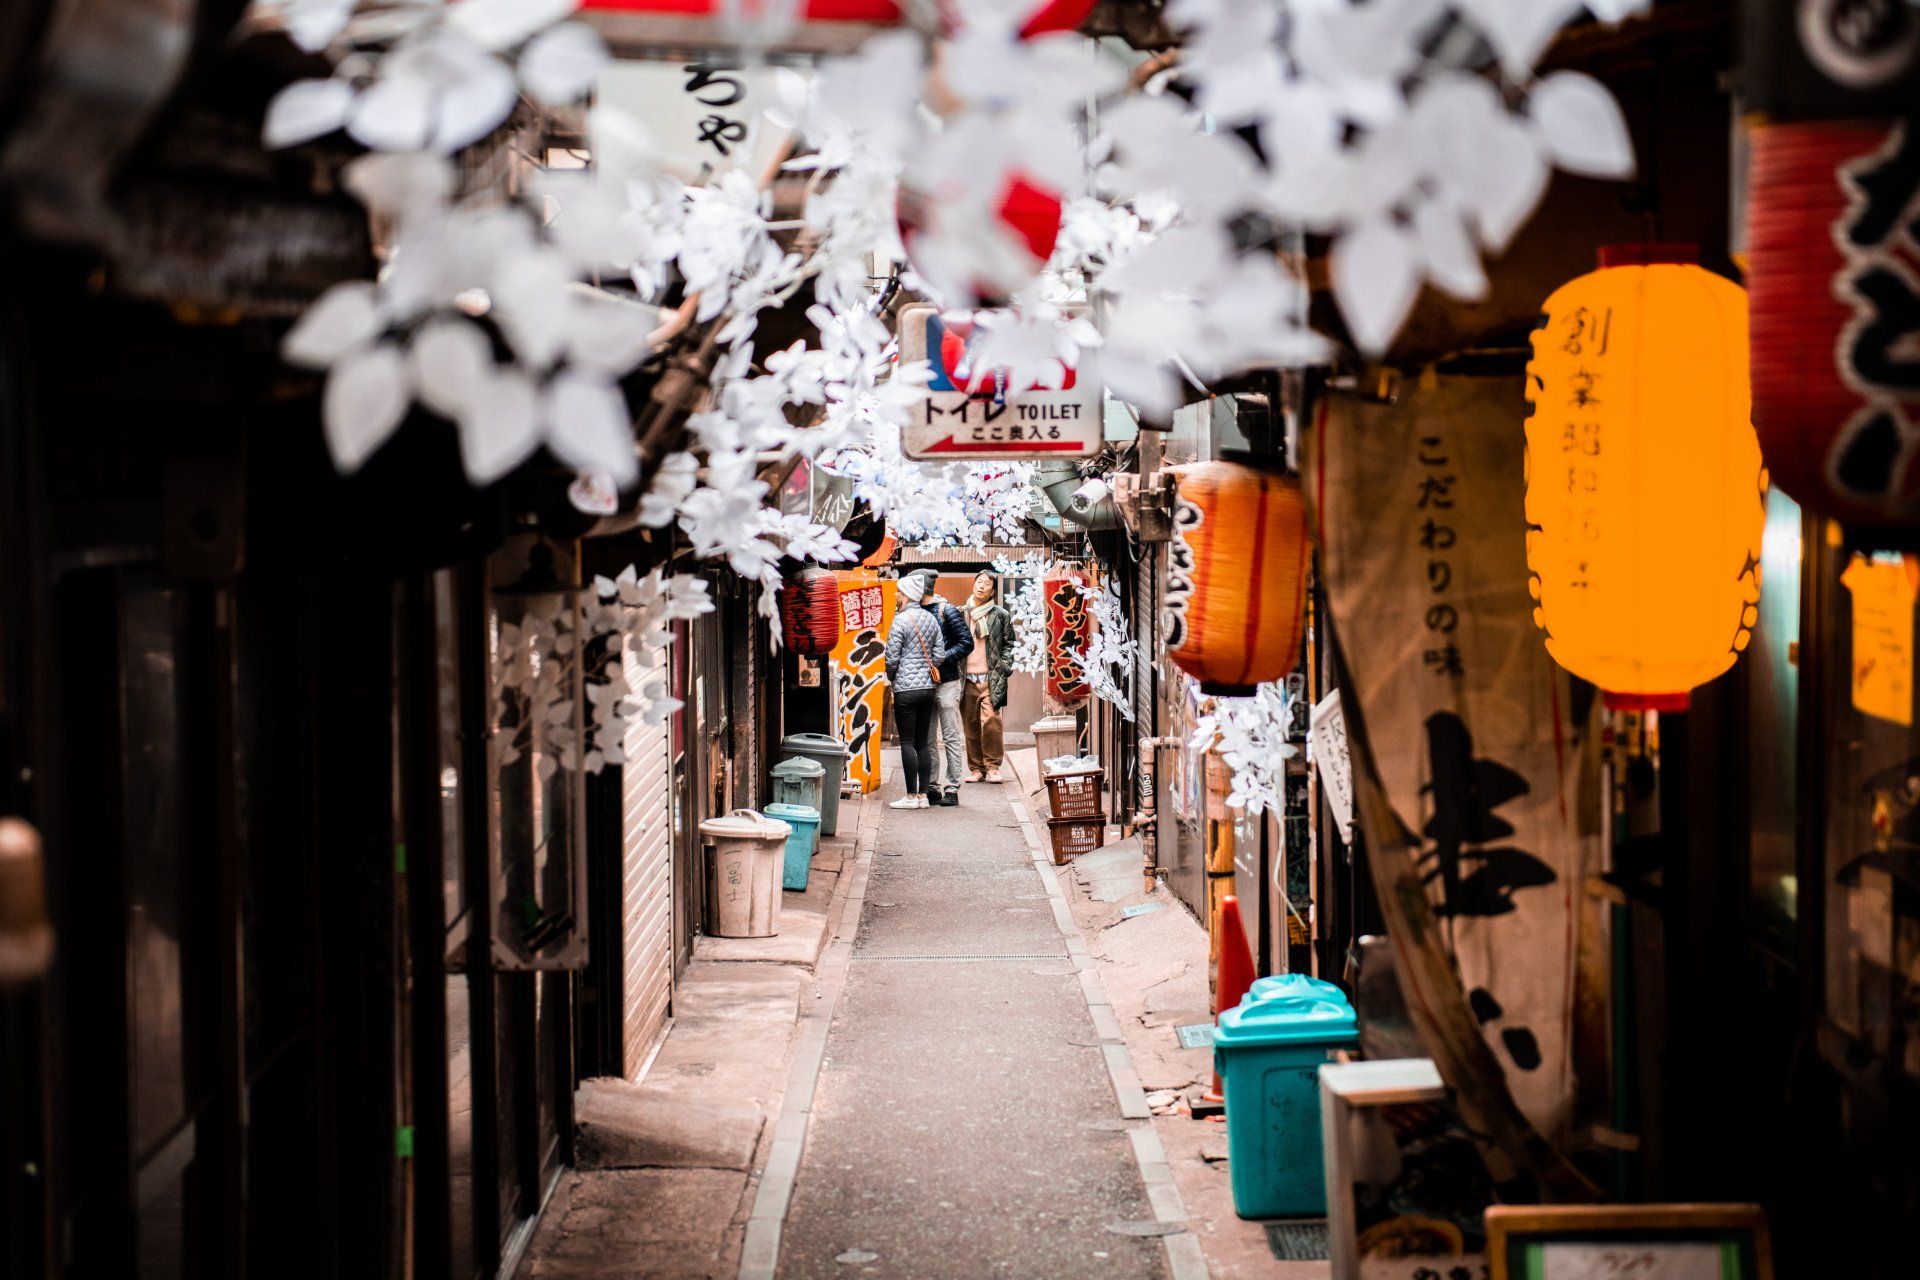 A narrow alleyway filled with lots of shops and lanterns.